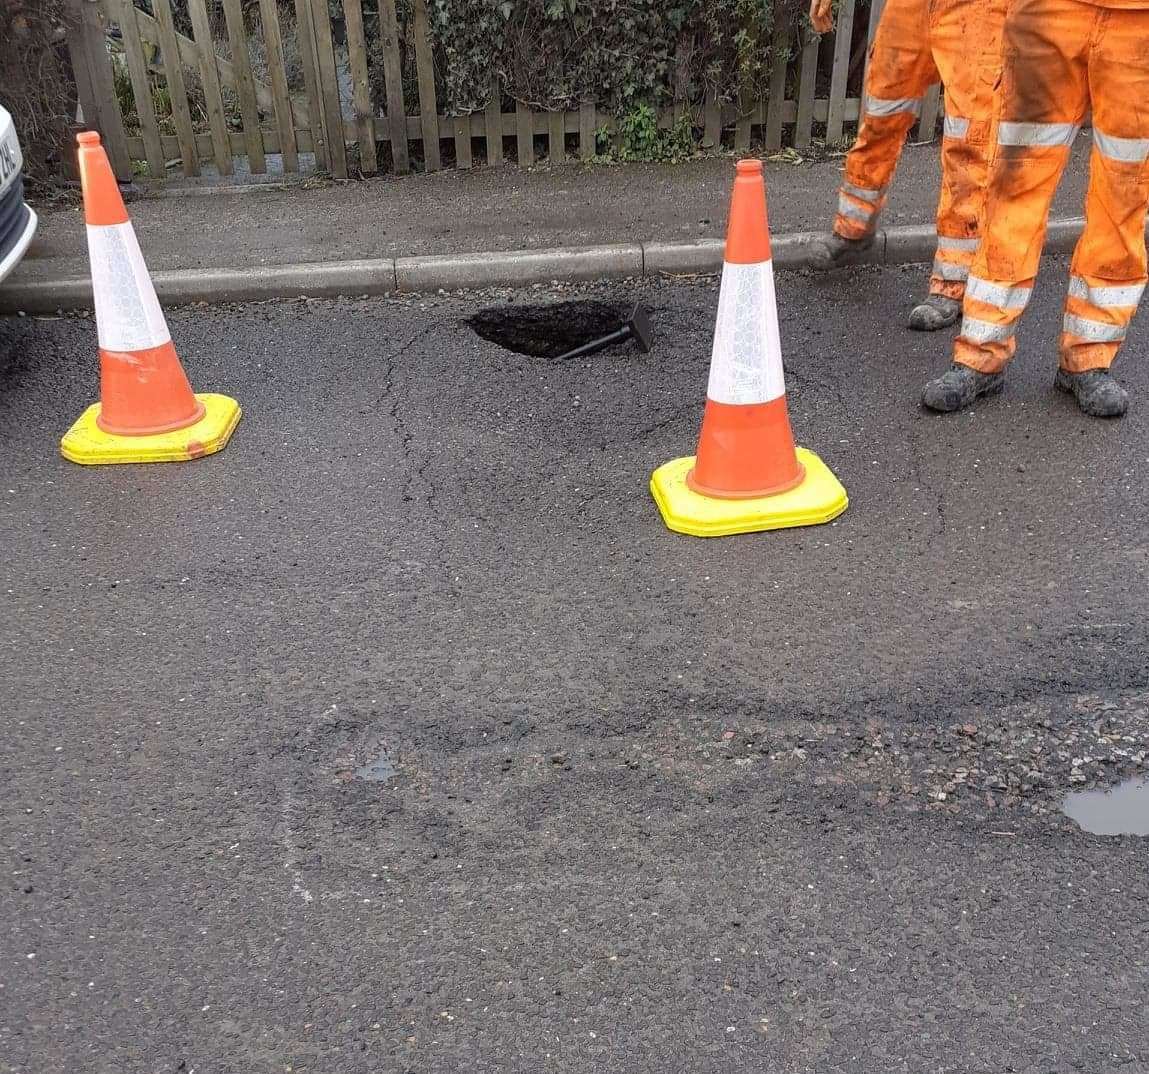 The hole subsided eventually throughout the day. Picture: Martin Harman